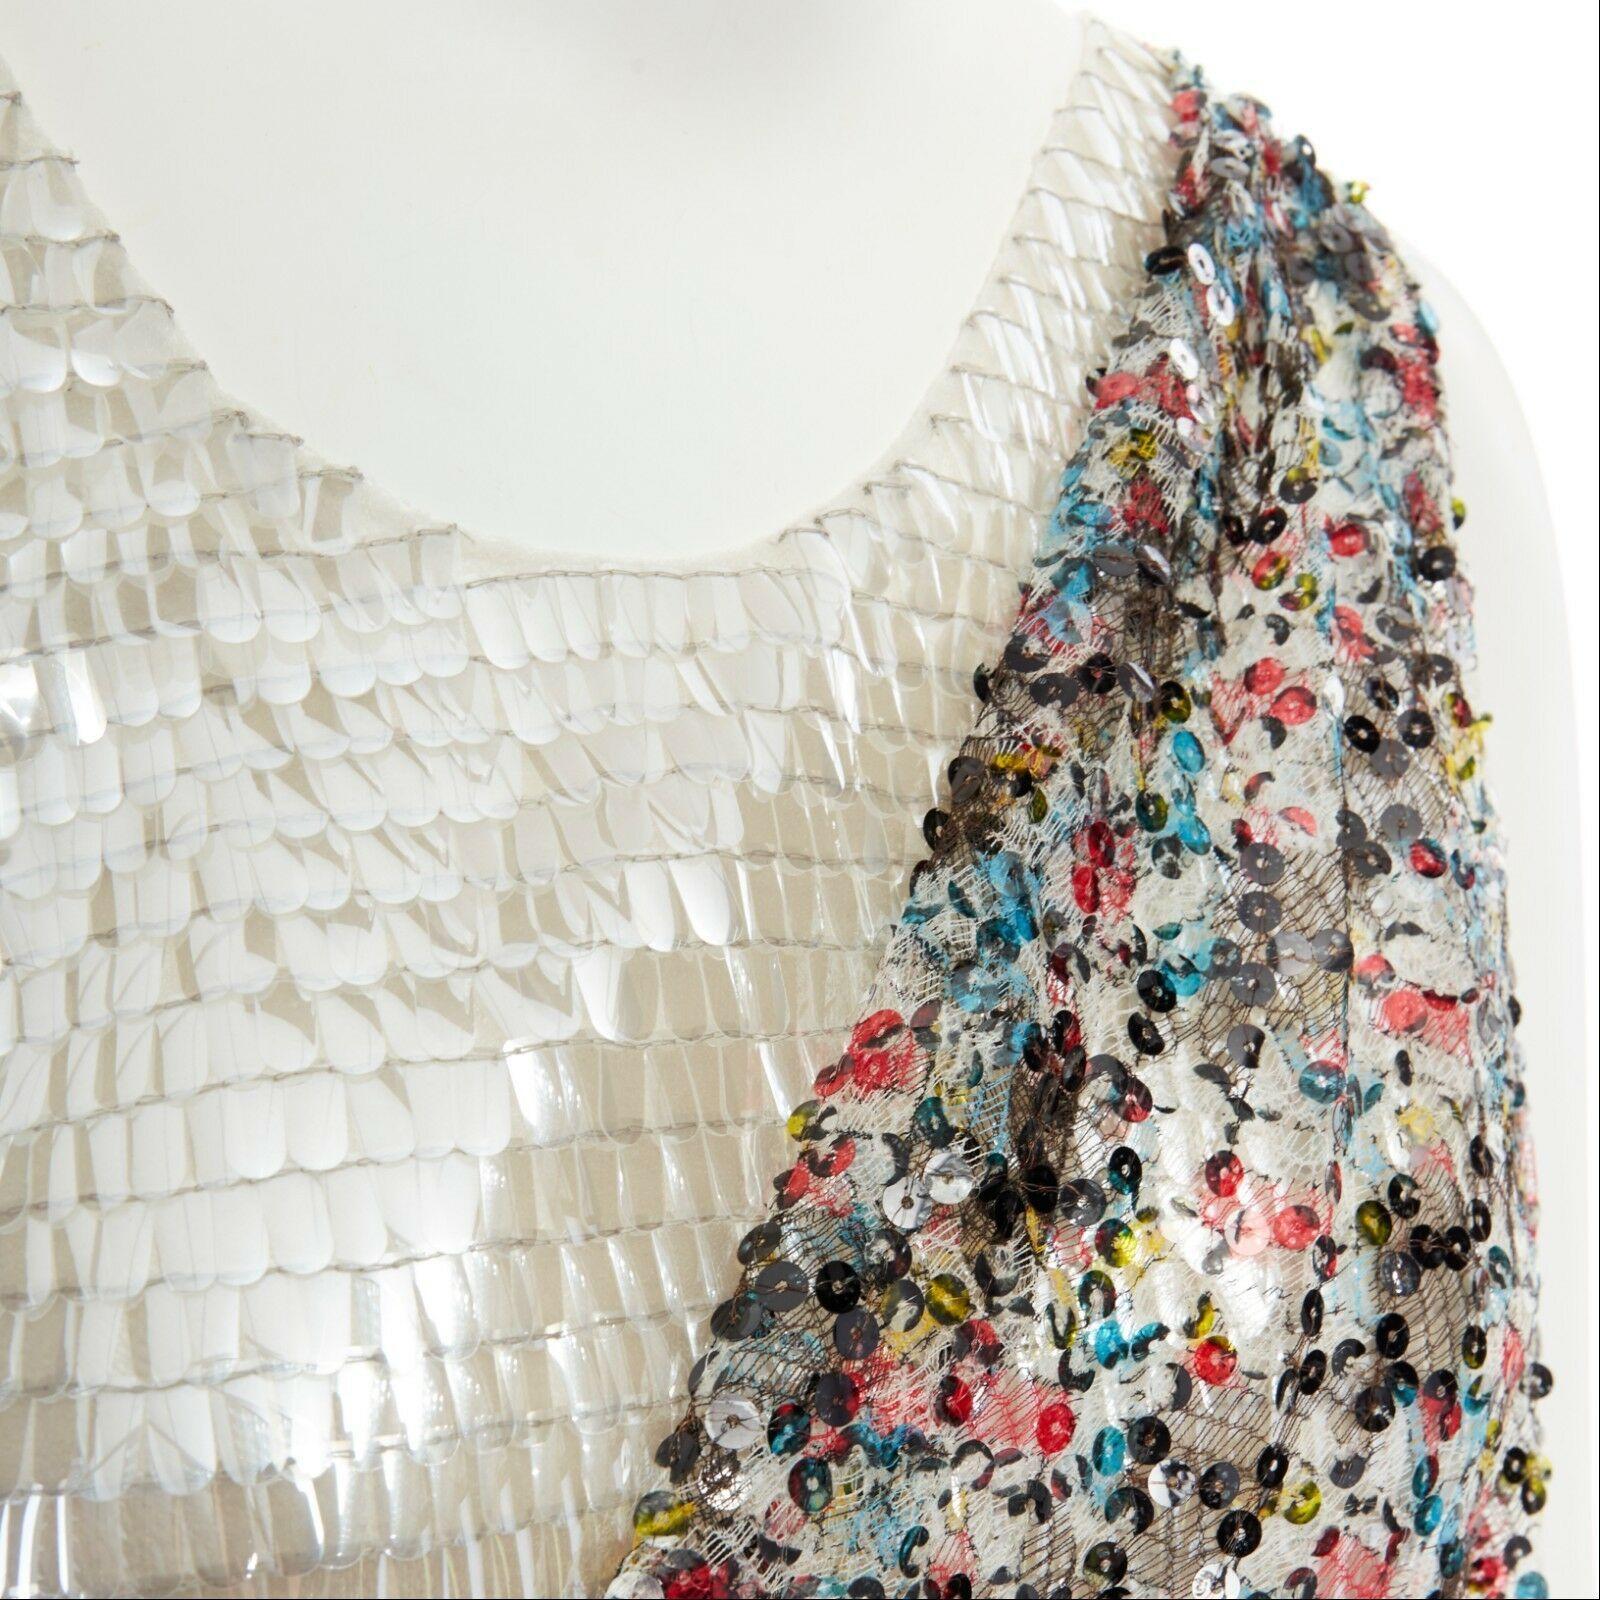 runway BALENCIAGA GHESQUIERE SS11 sequins lace pailette layer dress FR36 US4 UK8

BALENCIAGA by NICHOLAS GHESQUIERE
FROM THE SPRING SUMMER 2011 RUNWAY AND CAMPAIGN
POLYAMIDE, POLYESTER, RAYON, COTTON . PEARL PAILETTE UNDERLAY . 
MULTICOLOR PRINTED